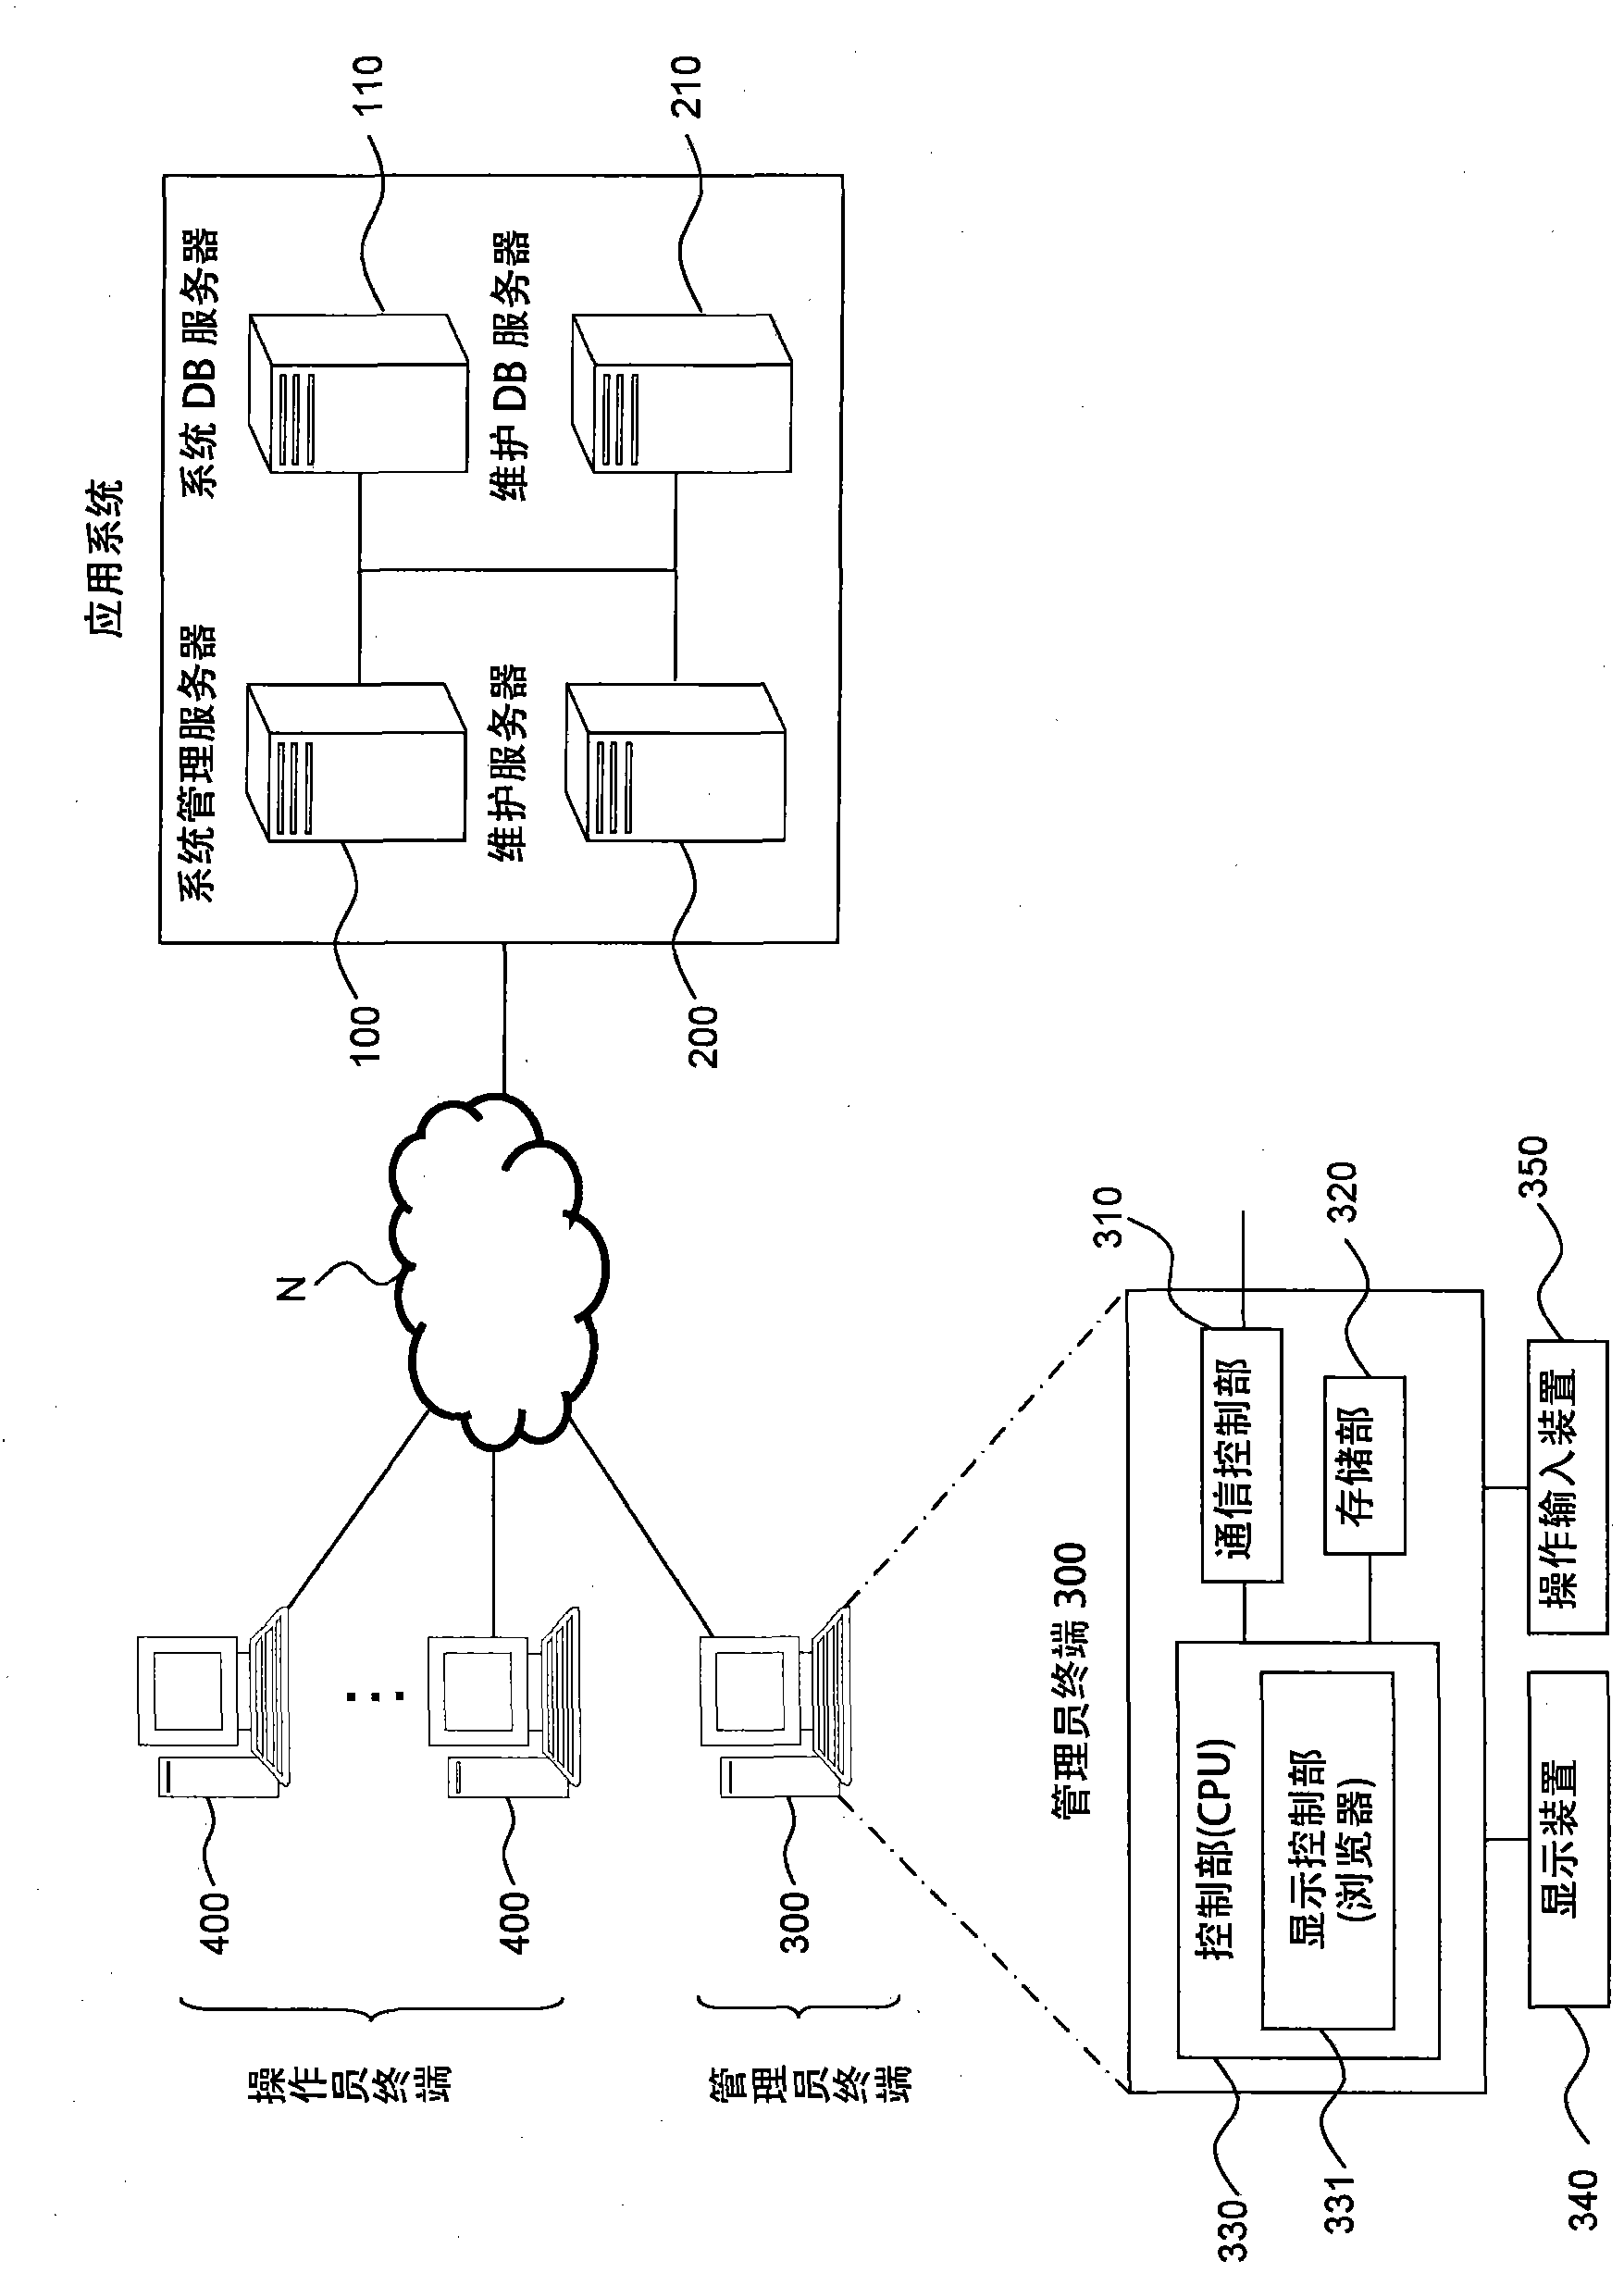 Maintenance device and application system